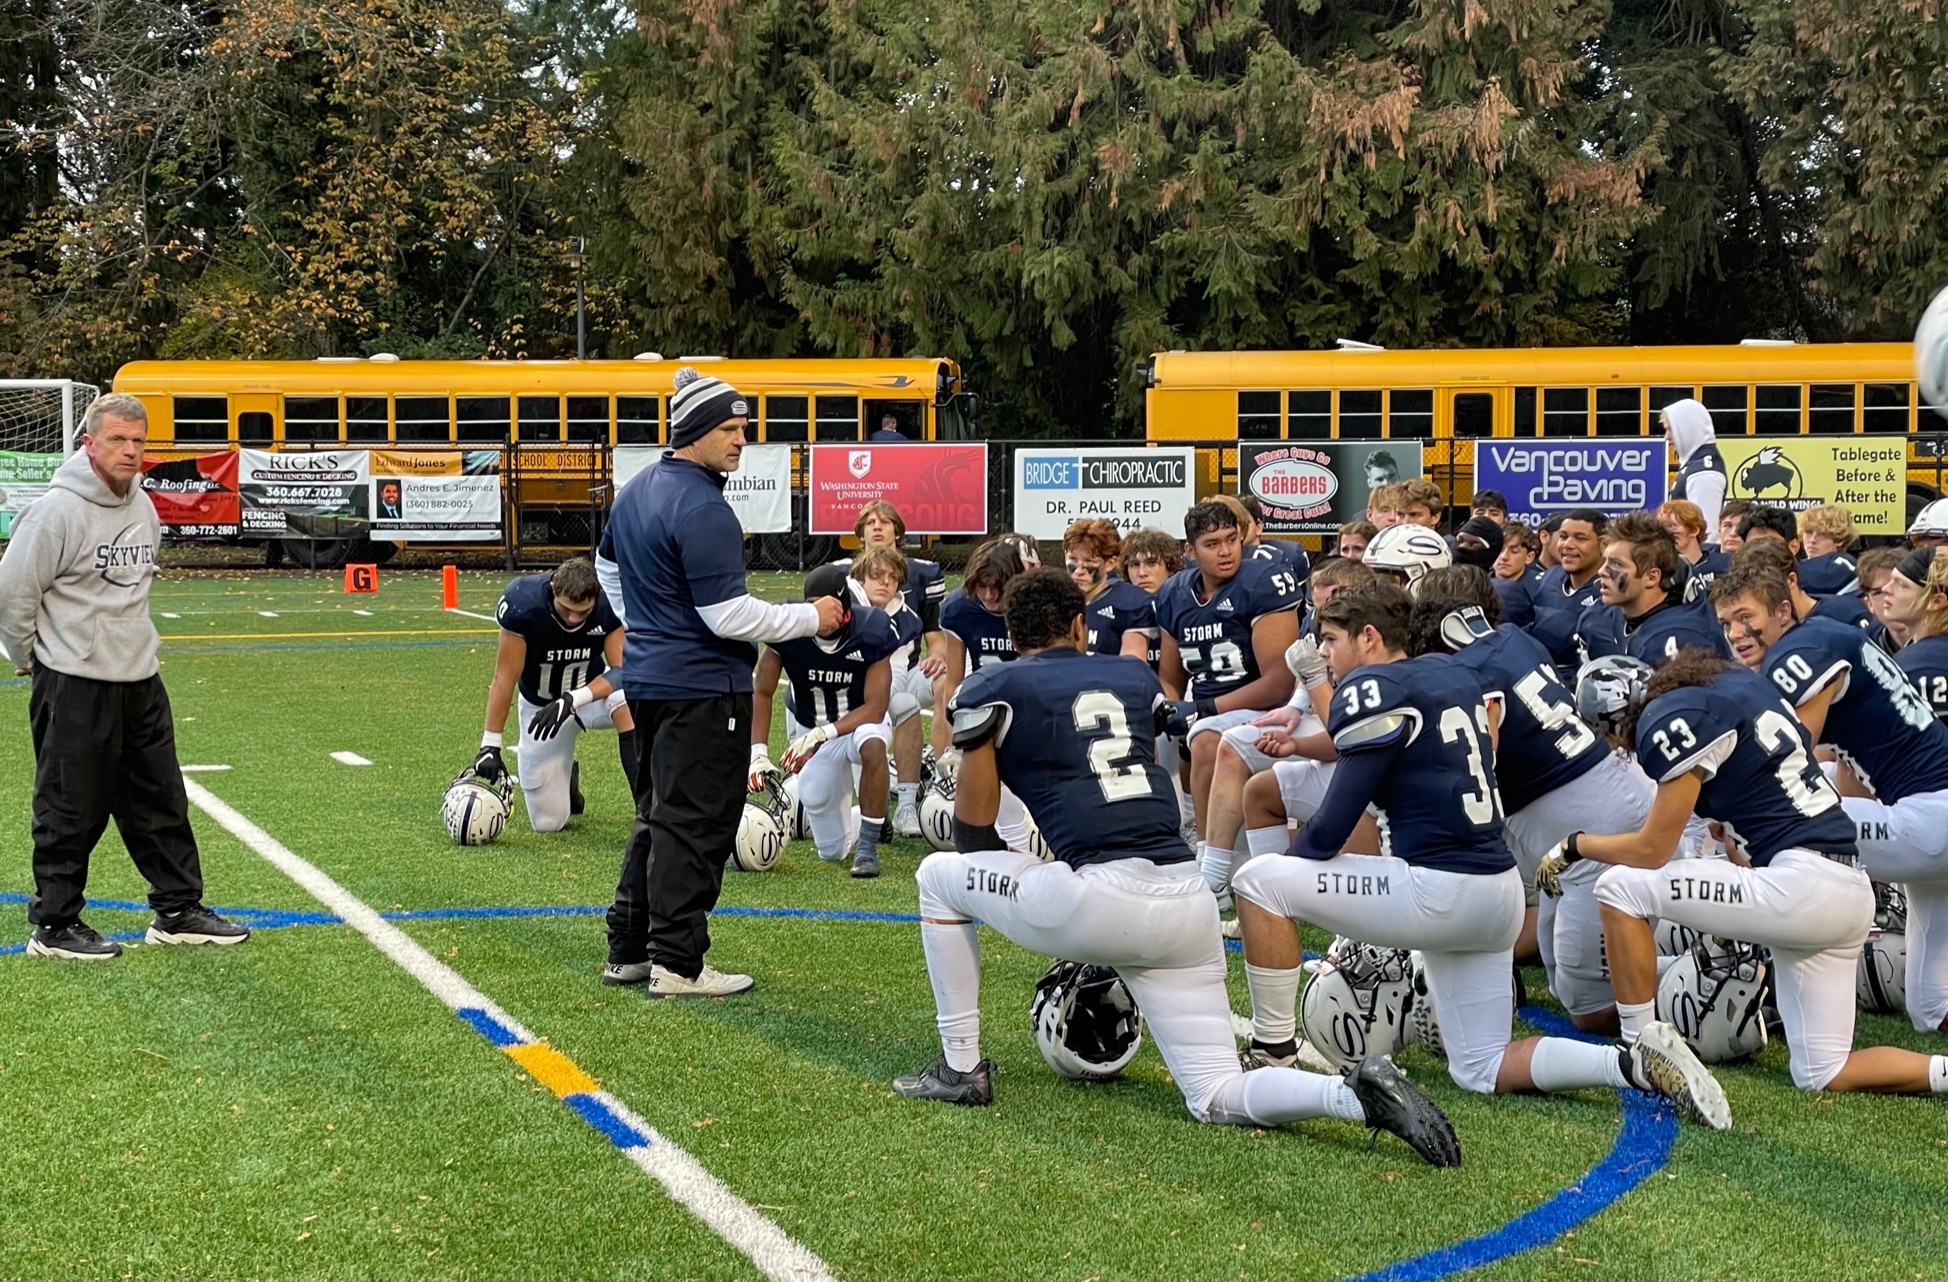 Skyview players and coaches gather on the field after defeating Kamiak on Saturday at Kiggins Bowl.